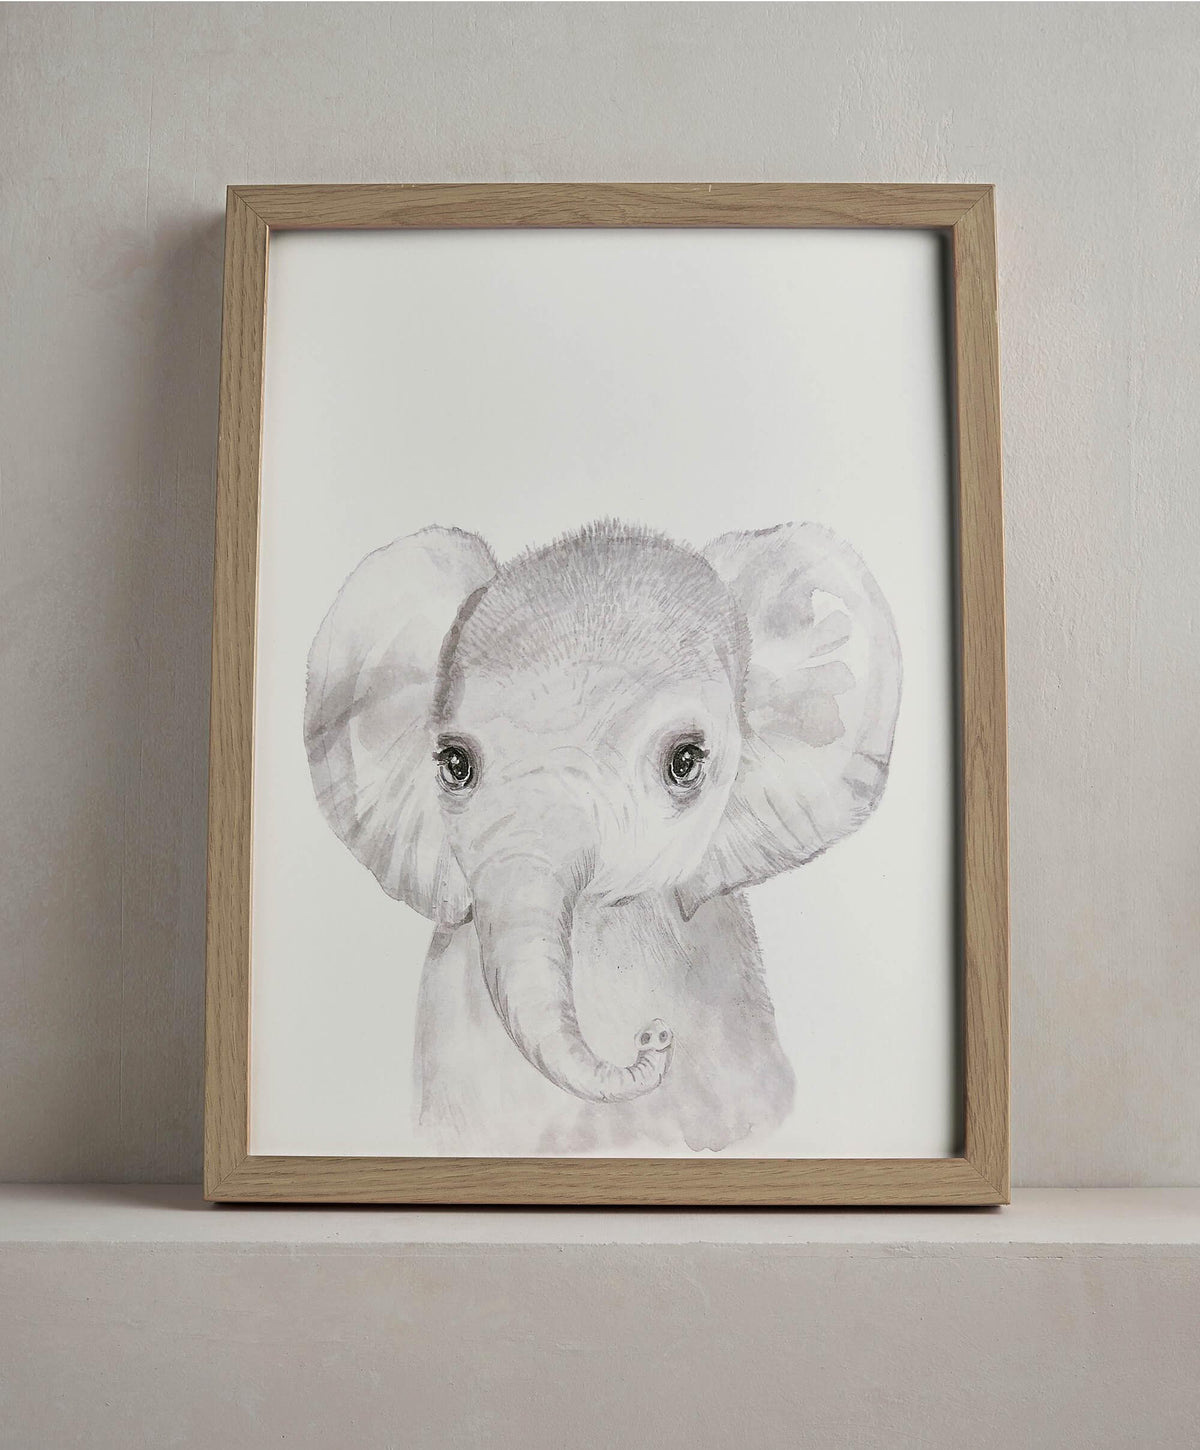 Welcome to the World Wall Art - Elephant